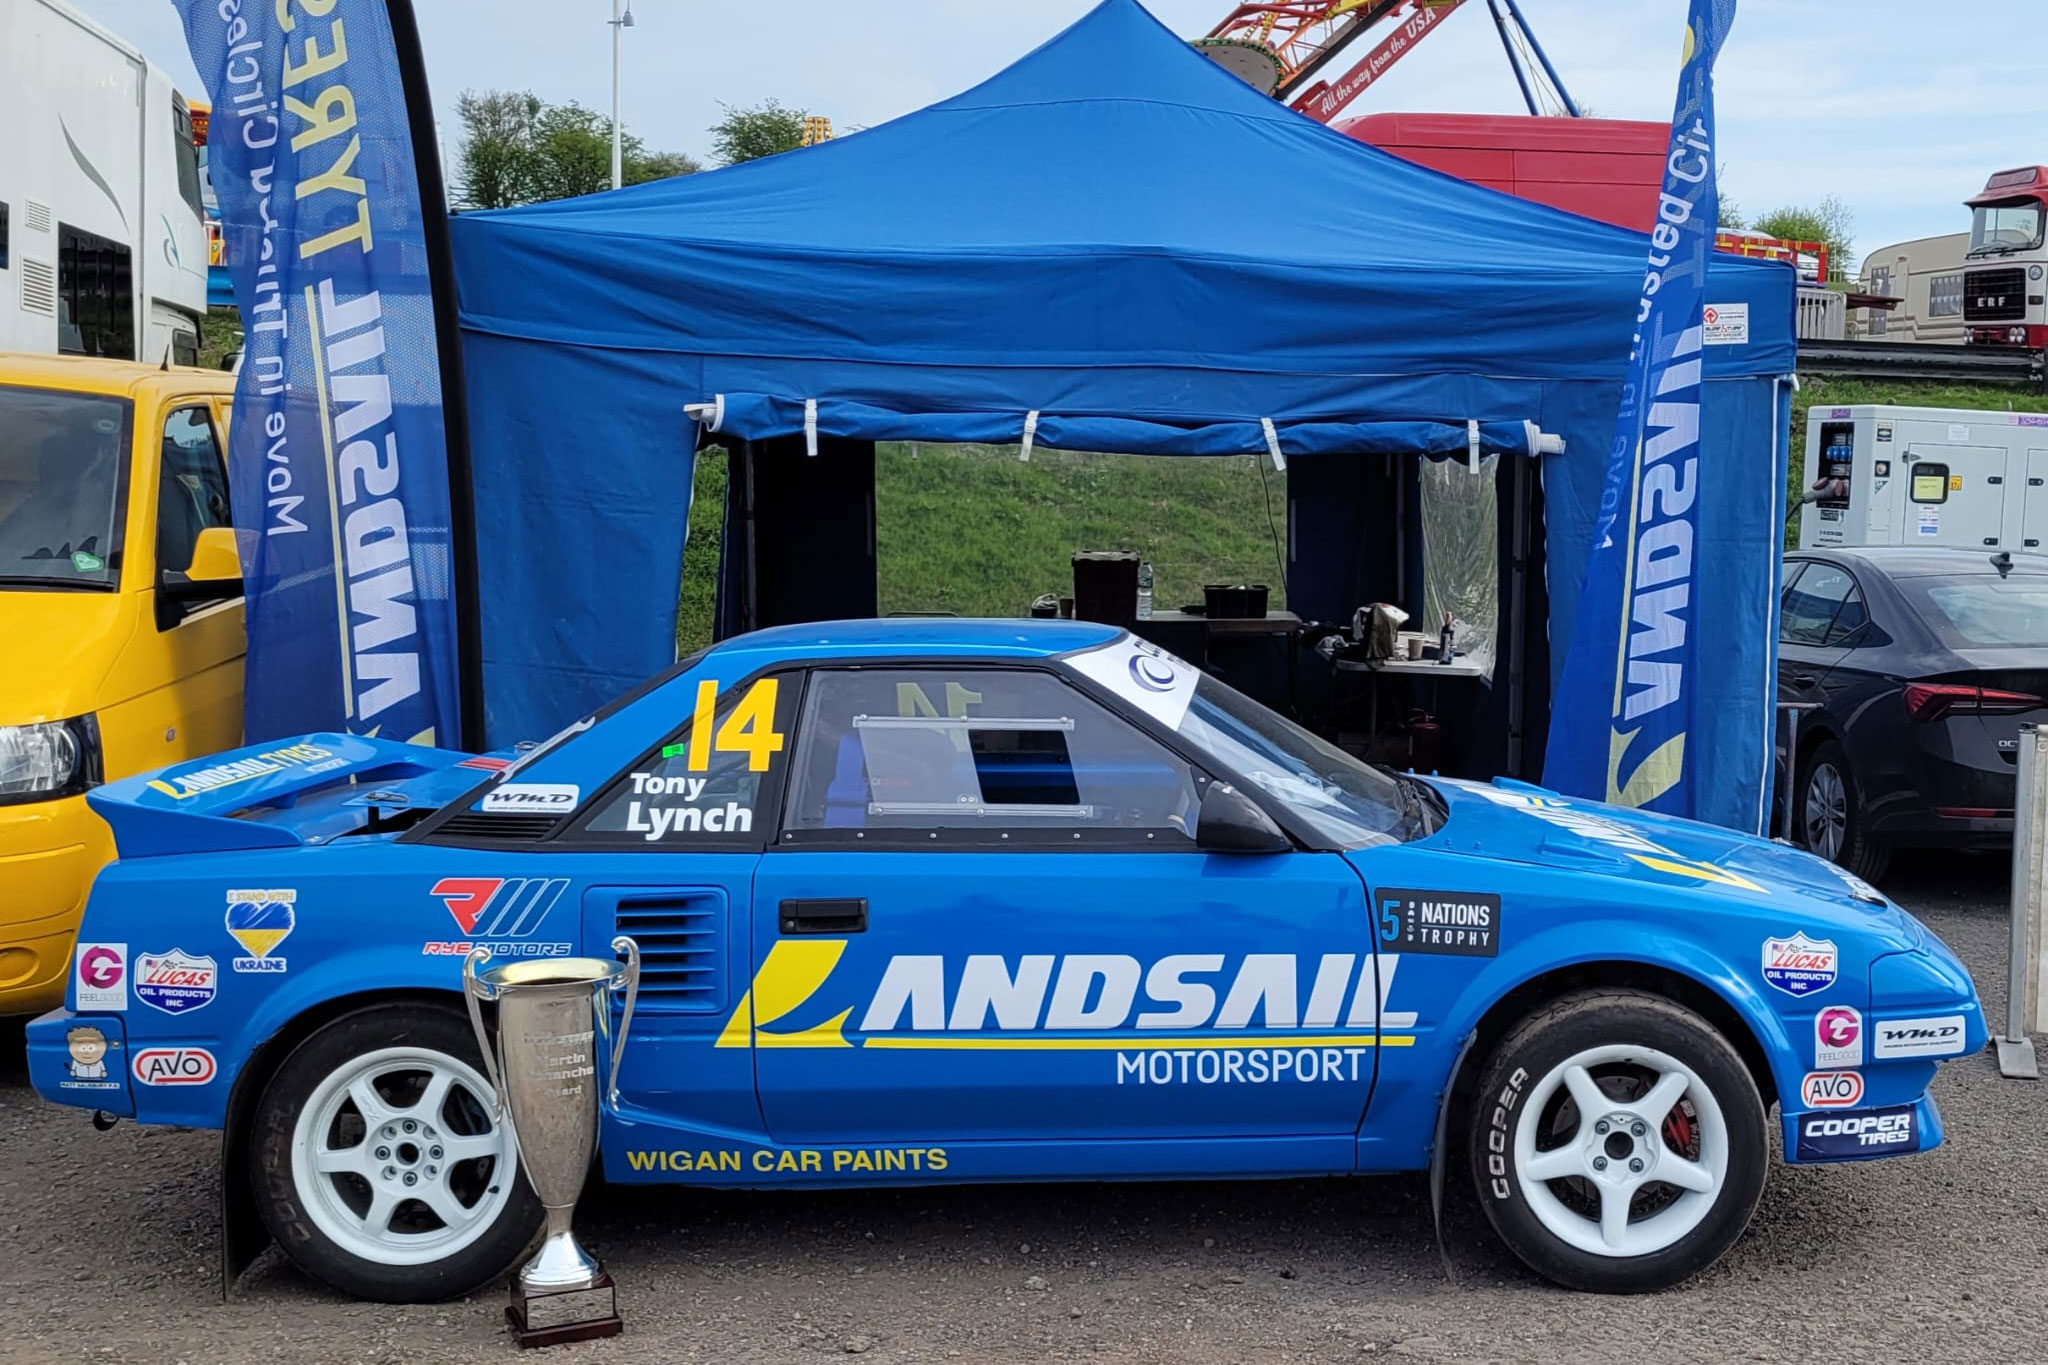 Tony Lynch and his Lucas Oil-sponsored MR2